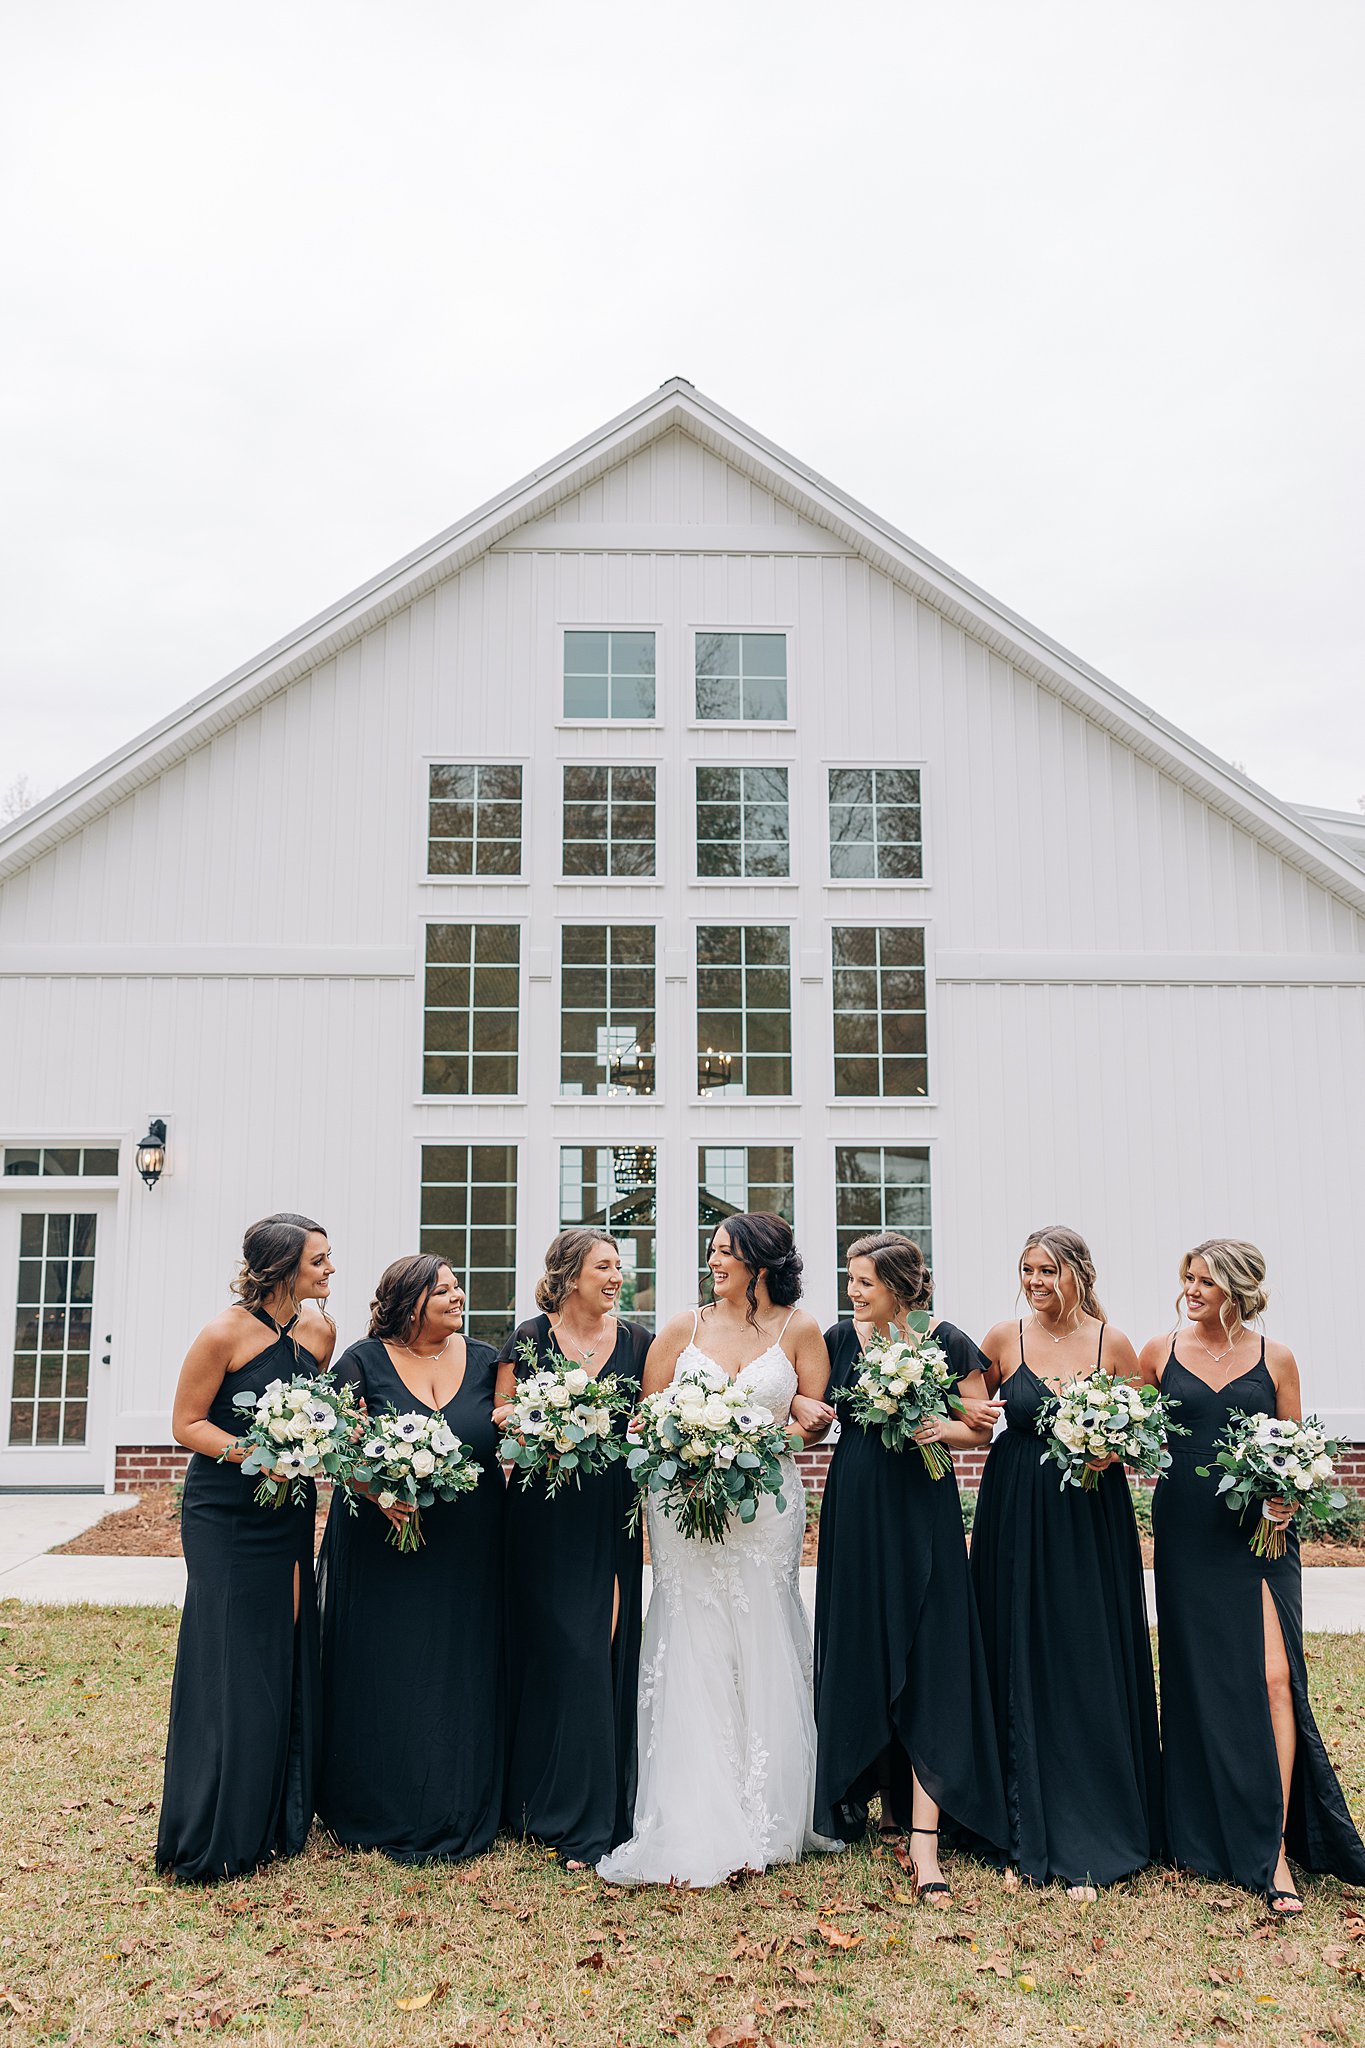 A bride stands in a lawn laughing with her six bridesmaids in black dresses and holding bouquets